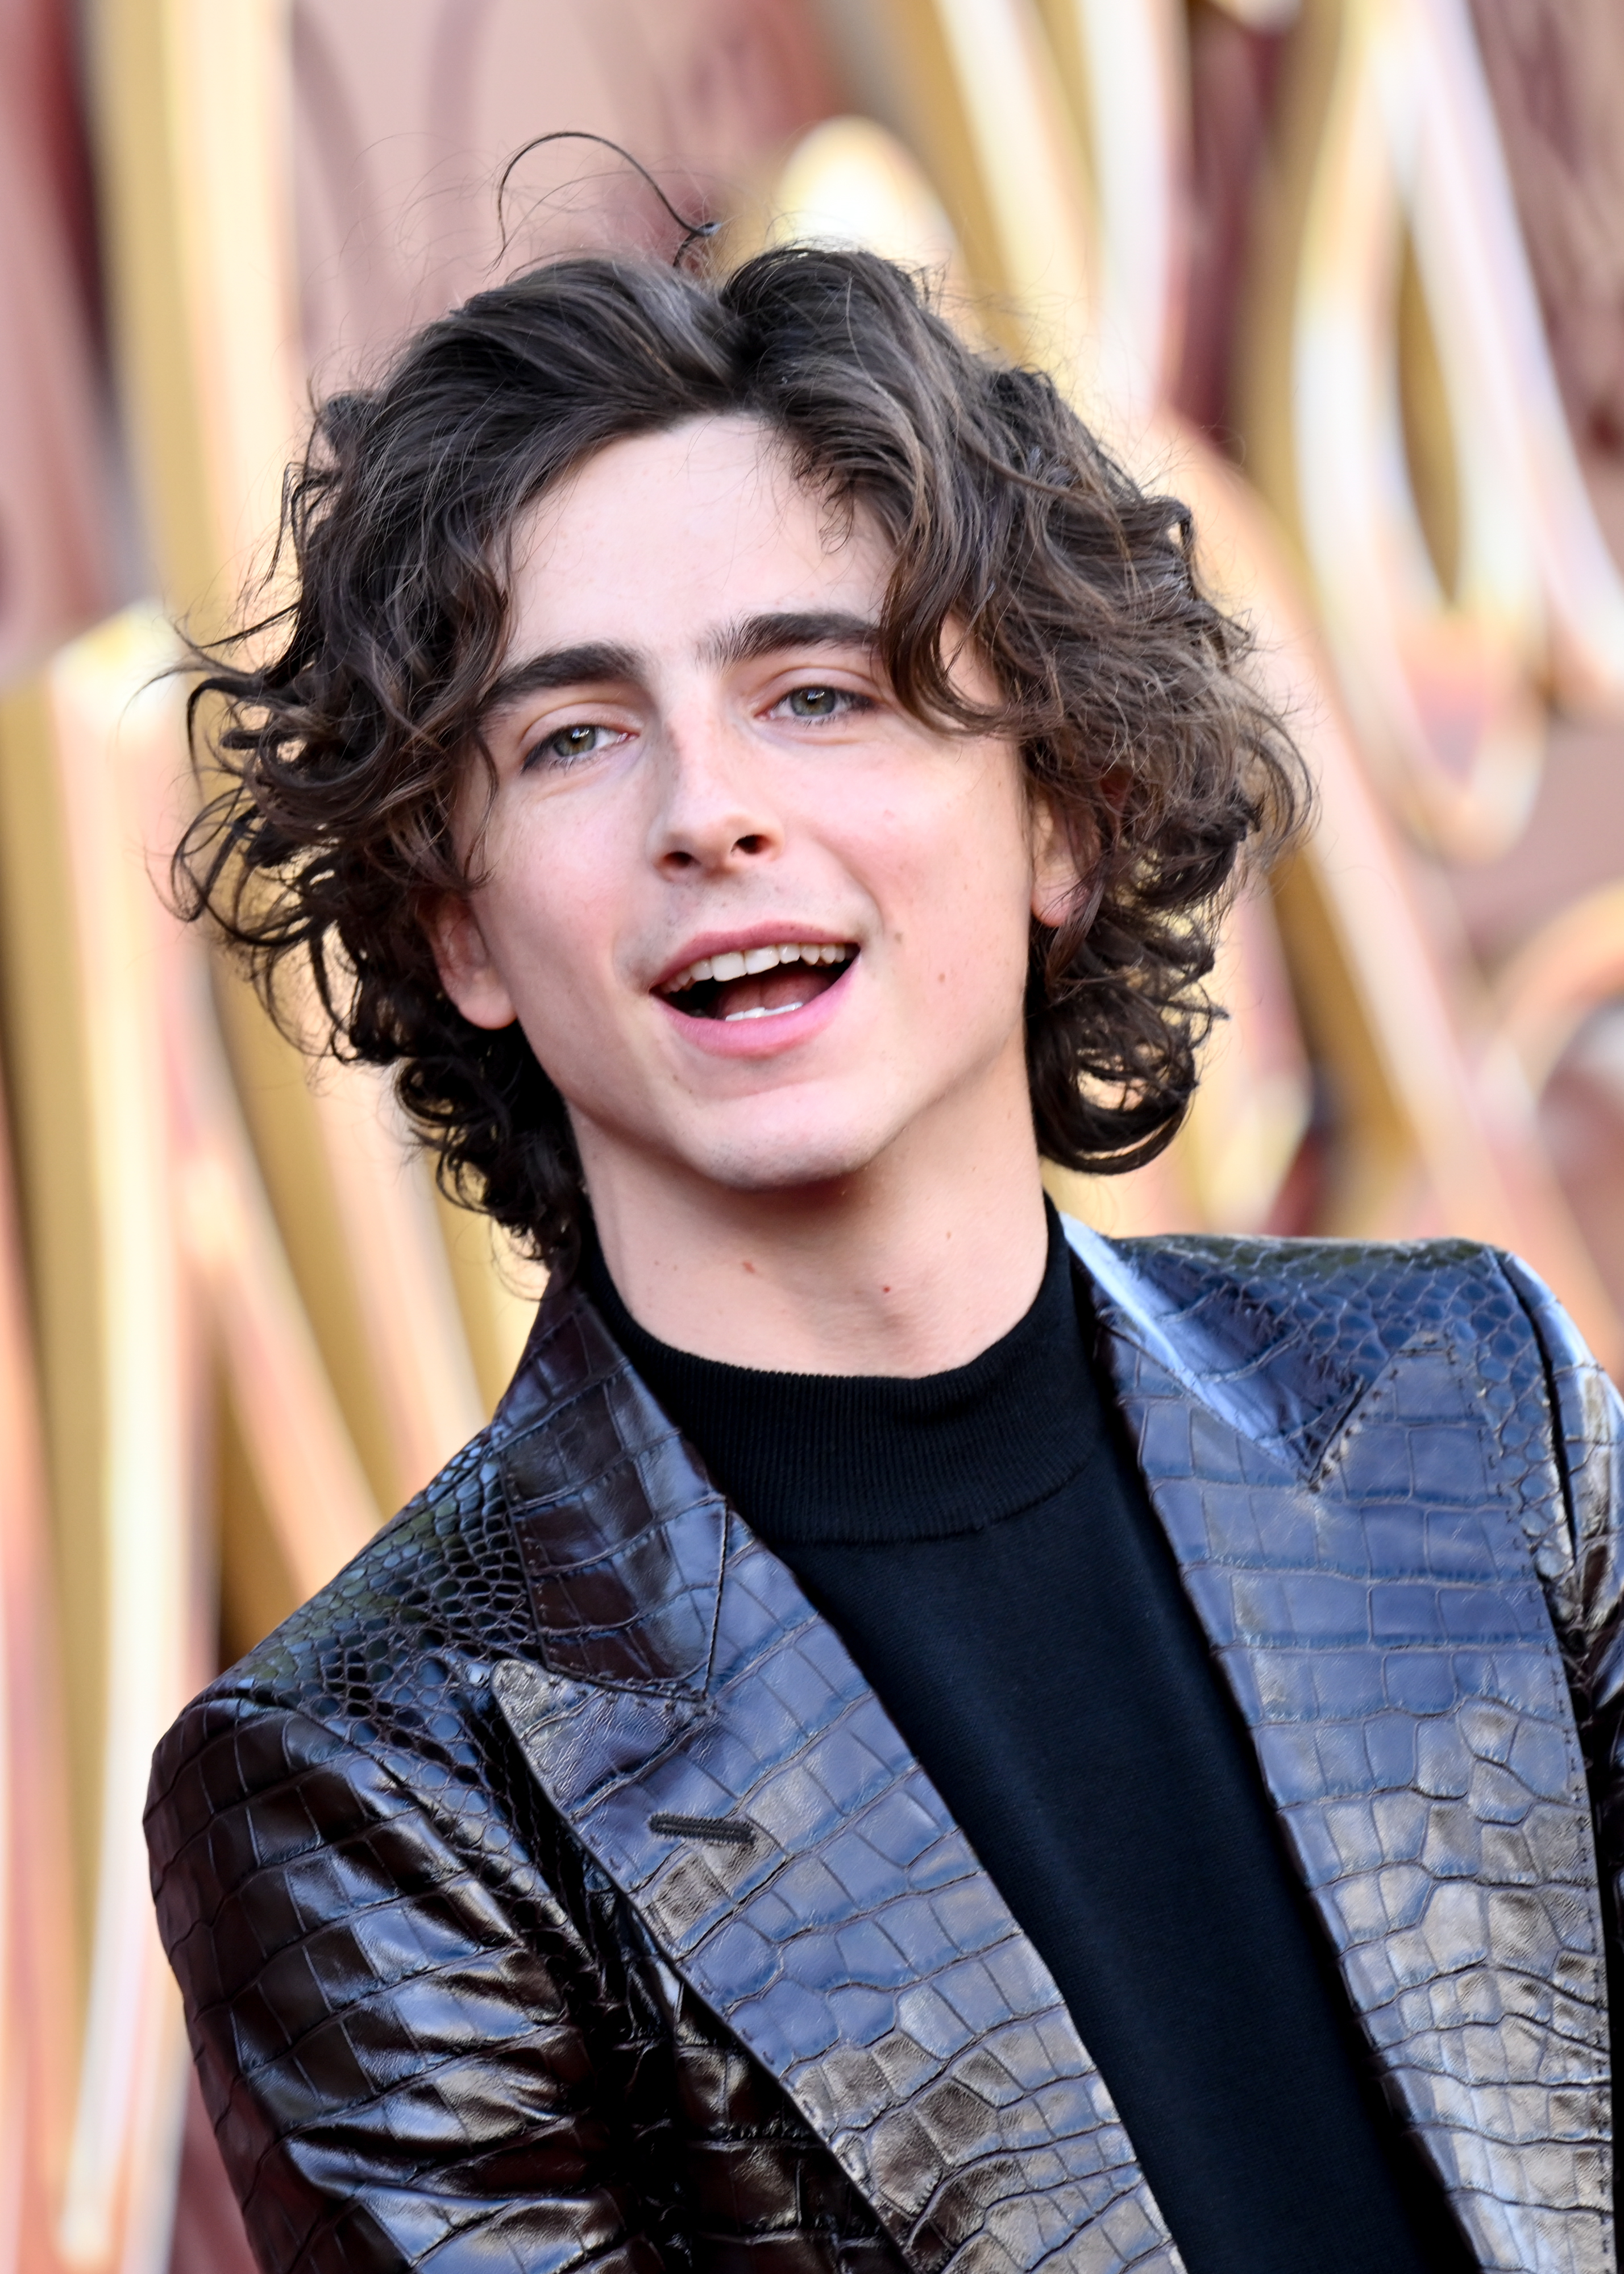 Timothée wearing a black turtleneck and a textured jacket on the red carpet